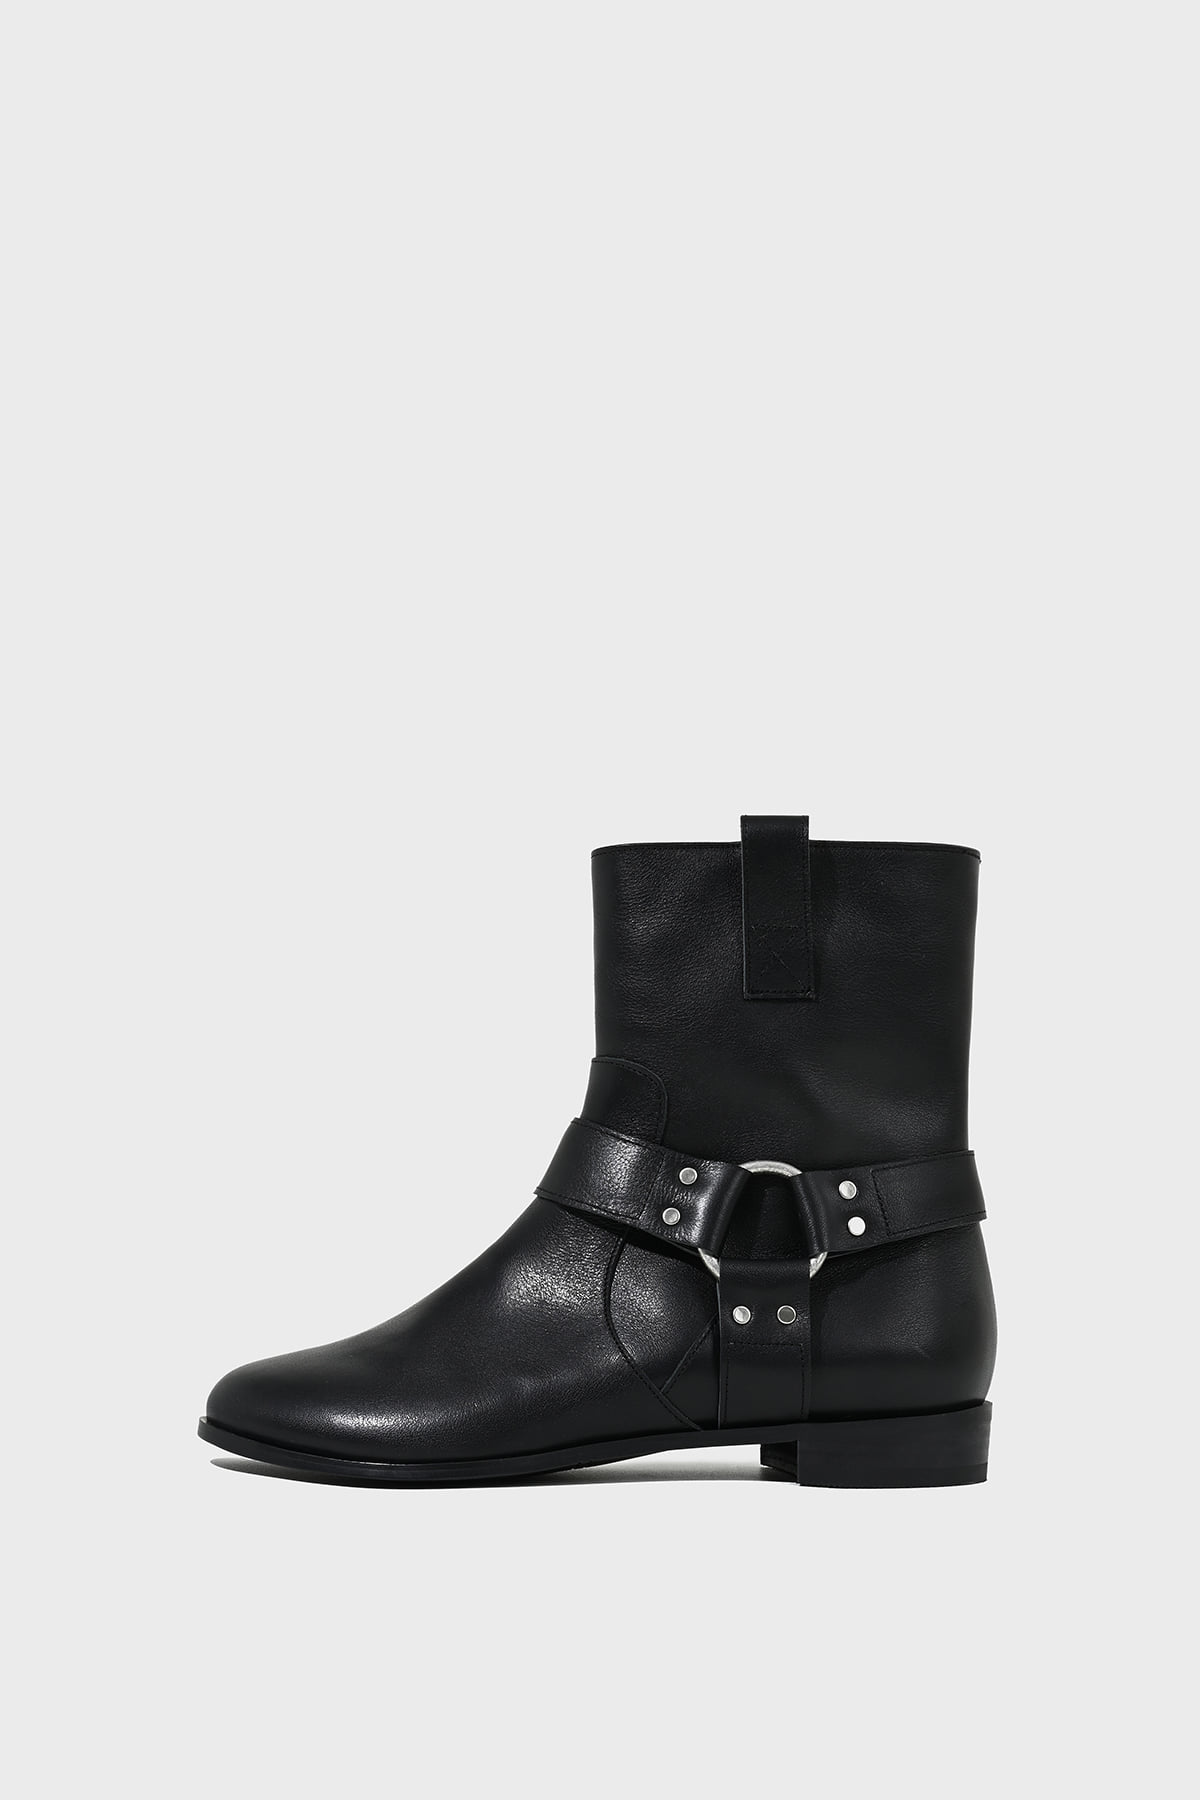 Classic Harness Boots_Black Leather